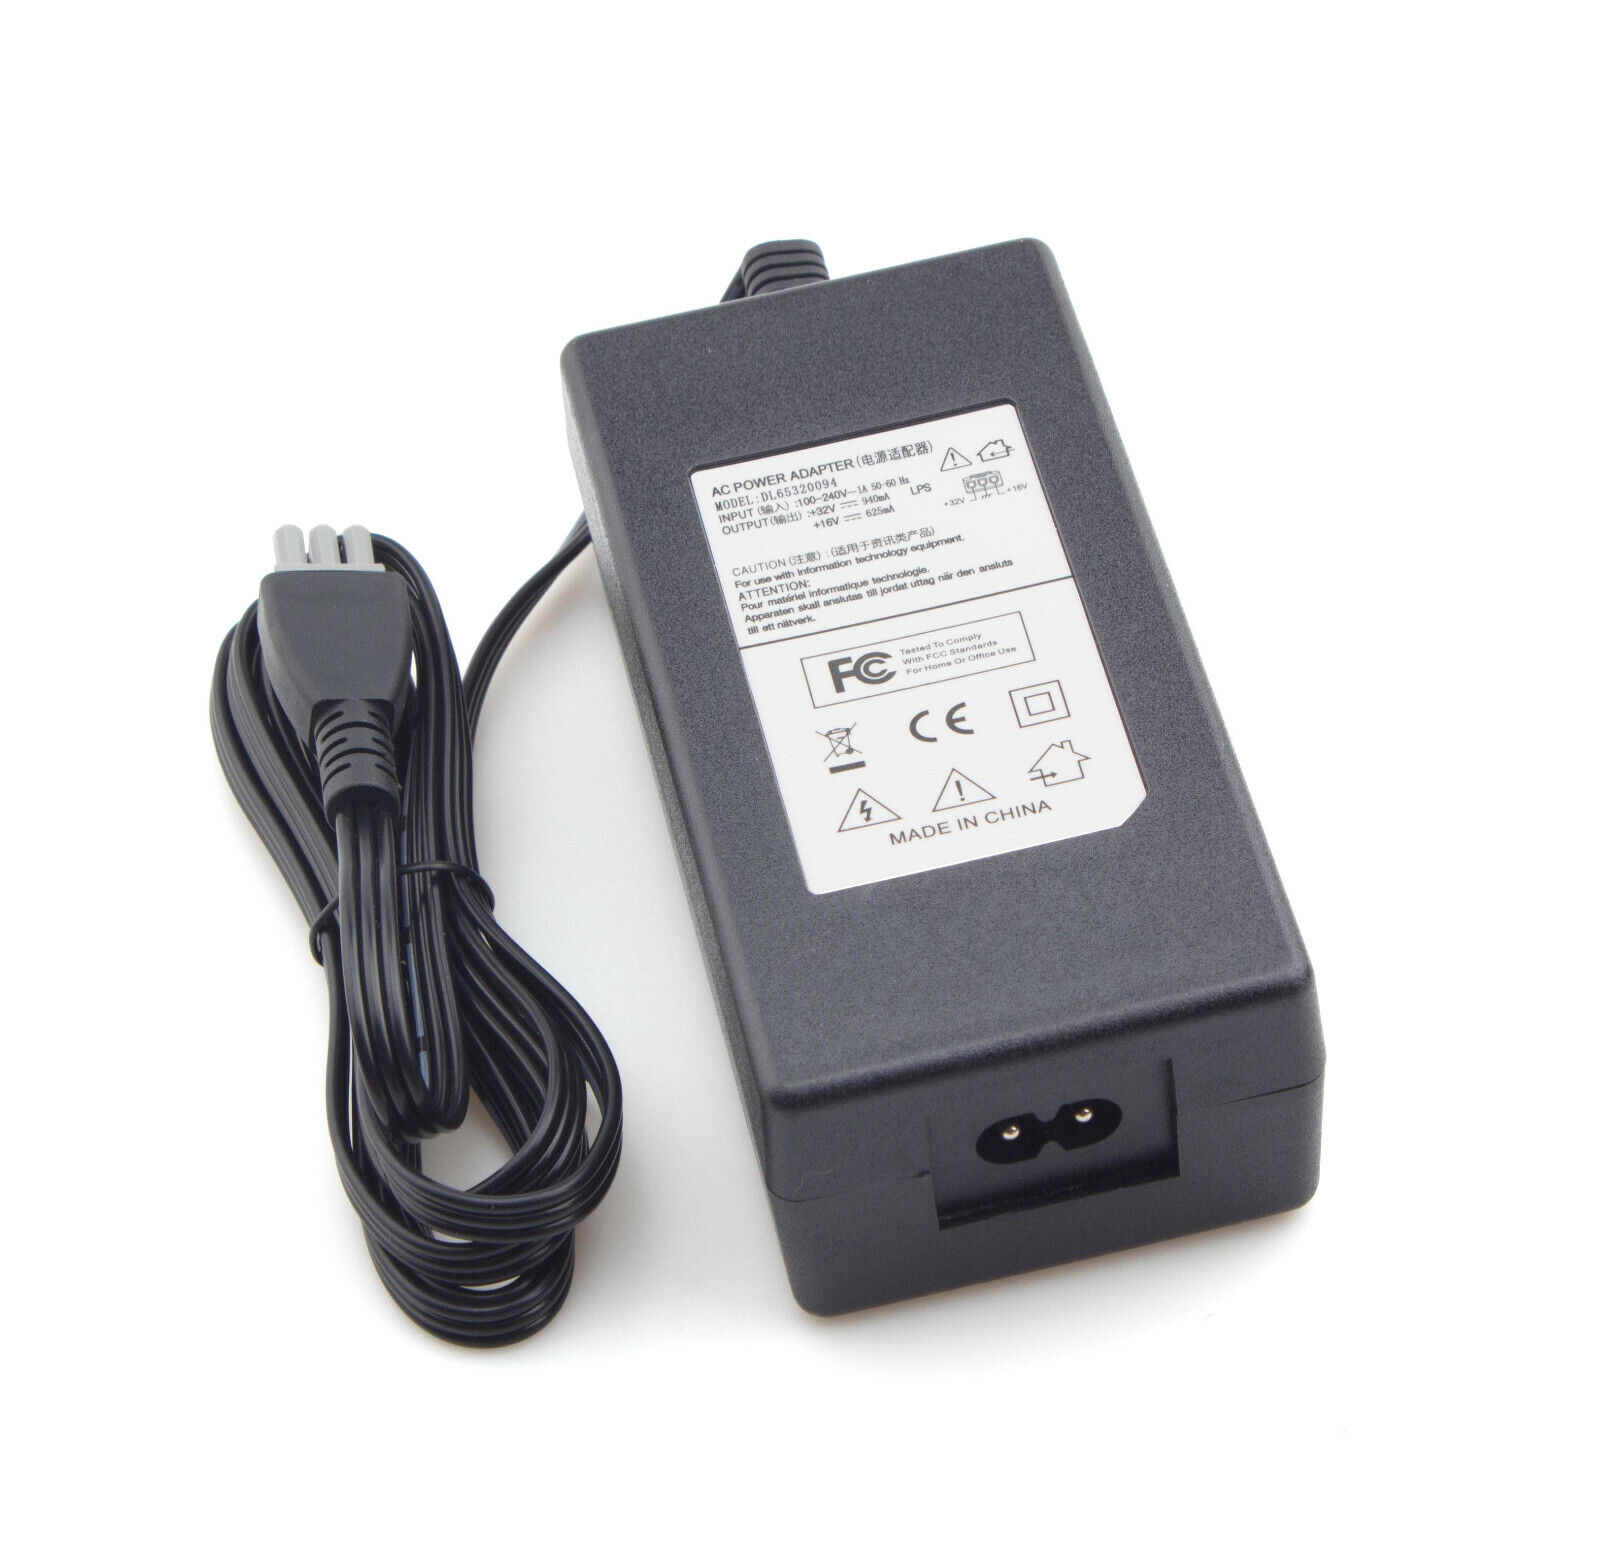 0957-2146 0957-2094 AC Adapter Power for HP Photosmart C3140 C4180 PSC 1350 1510